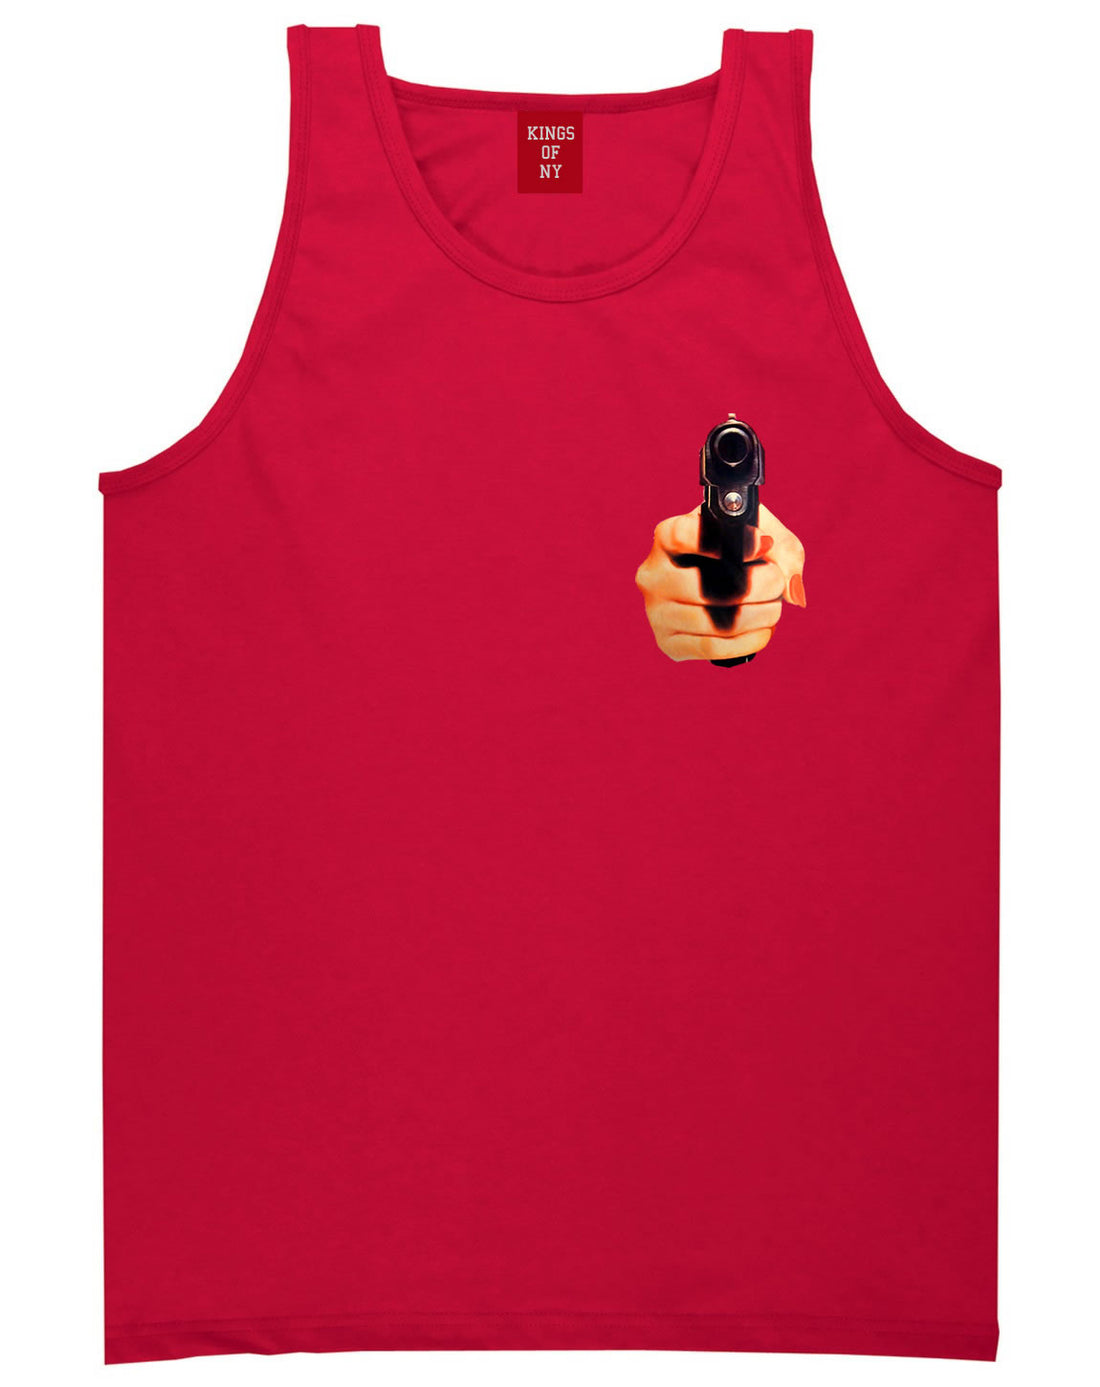 Hand Gun Women Girls Sexy Hot Tough Tank Top In Red by Kings Of NY